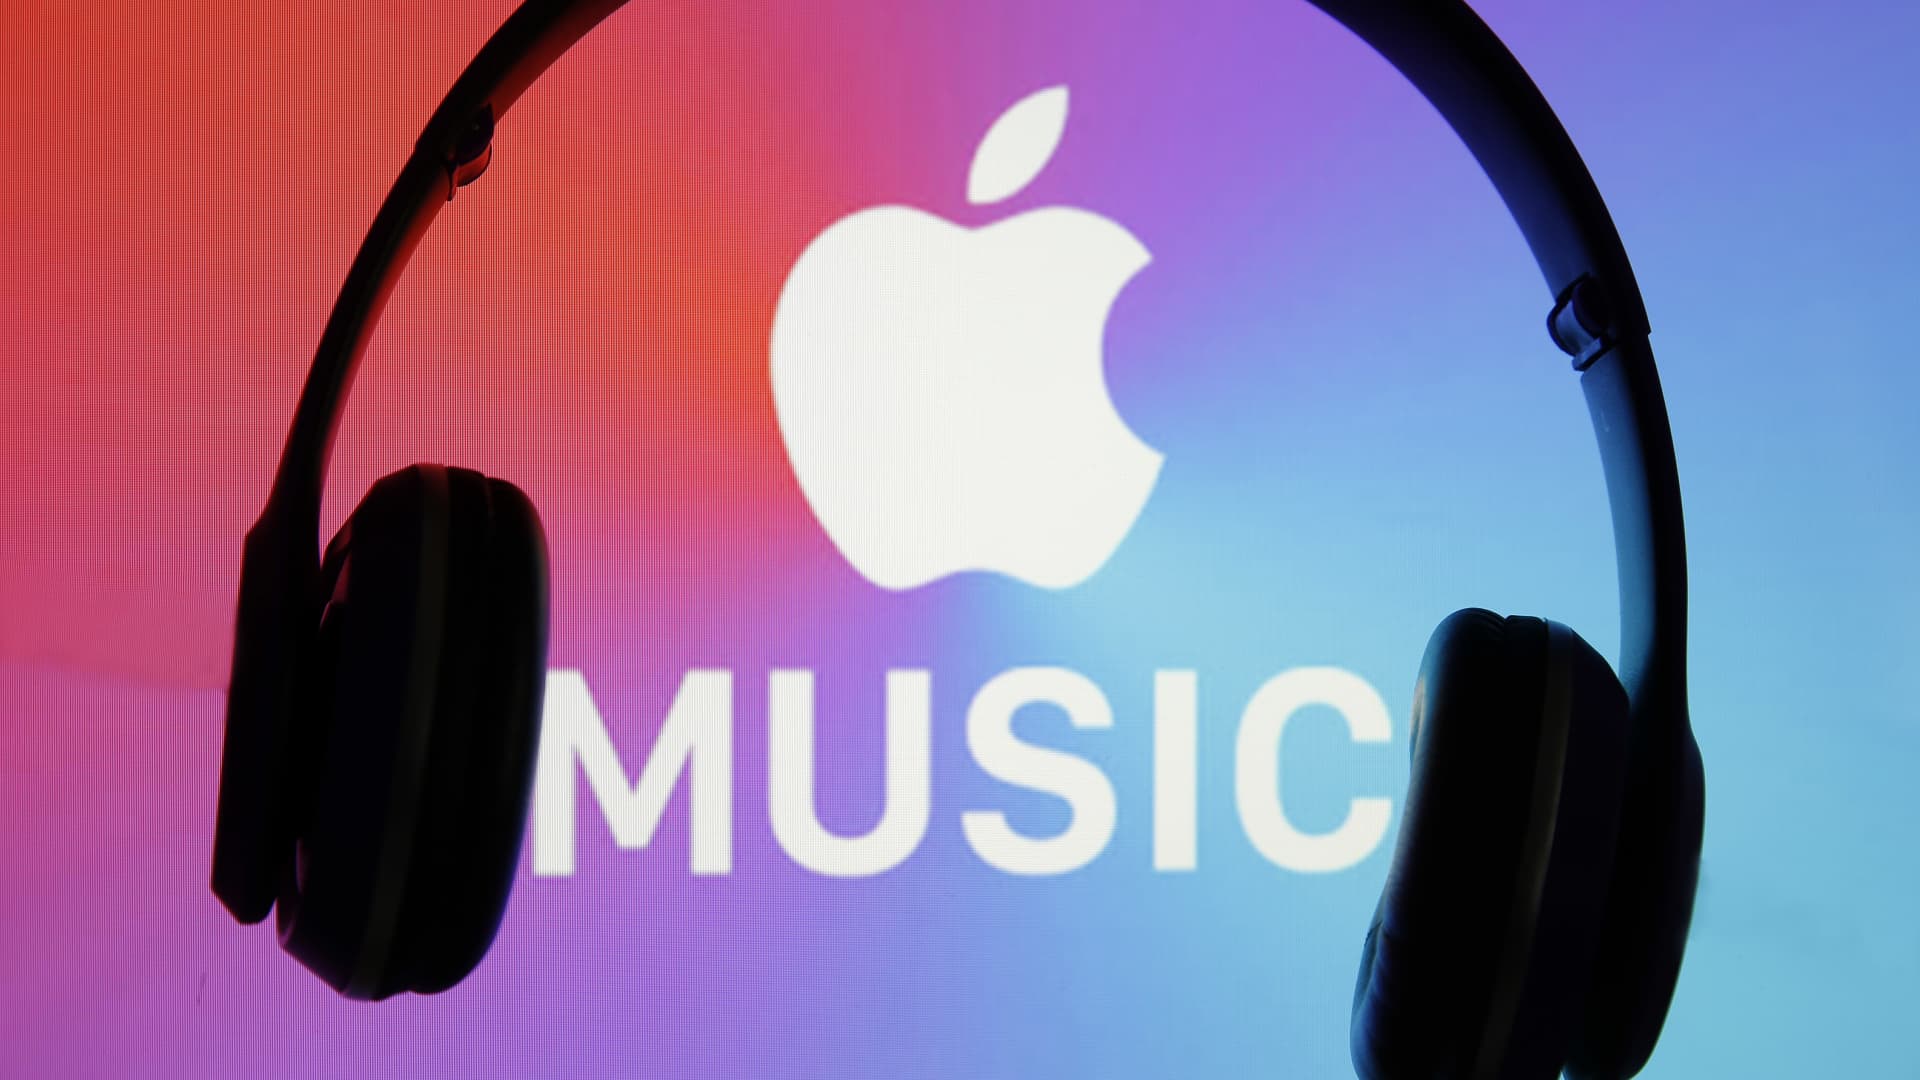 Apple announces new classical music app that launches on March 28